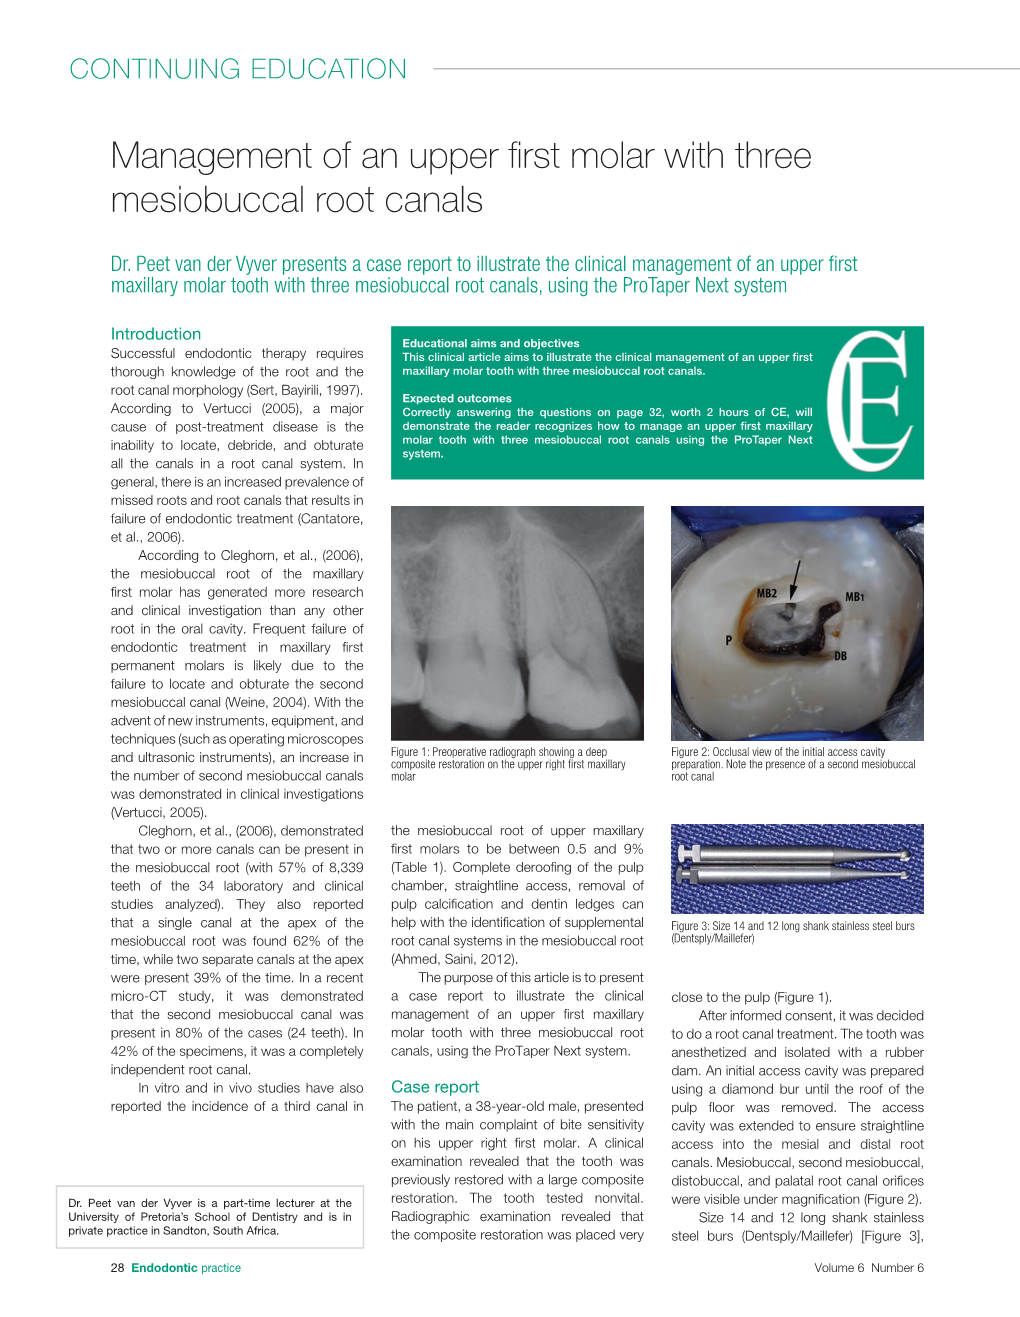 Management of an Upper First Molar with Three Mesiobuccal Root Canals